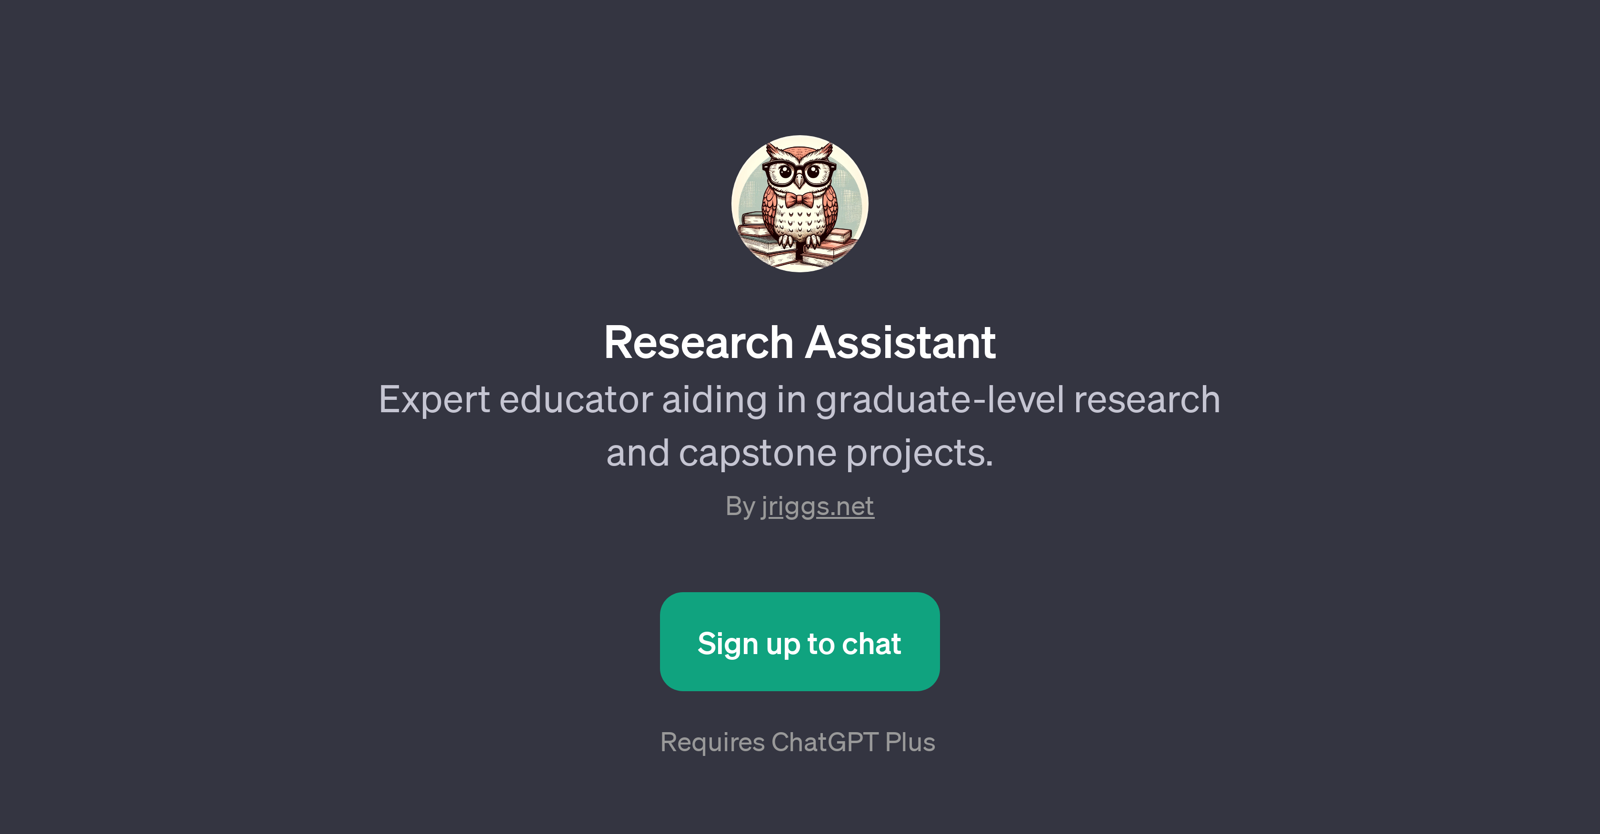 Research Assistant website